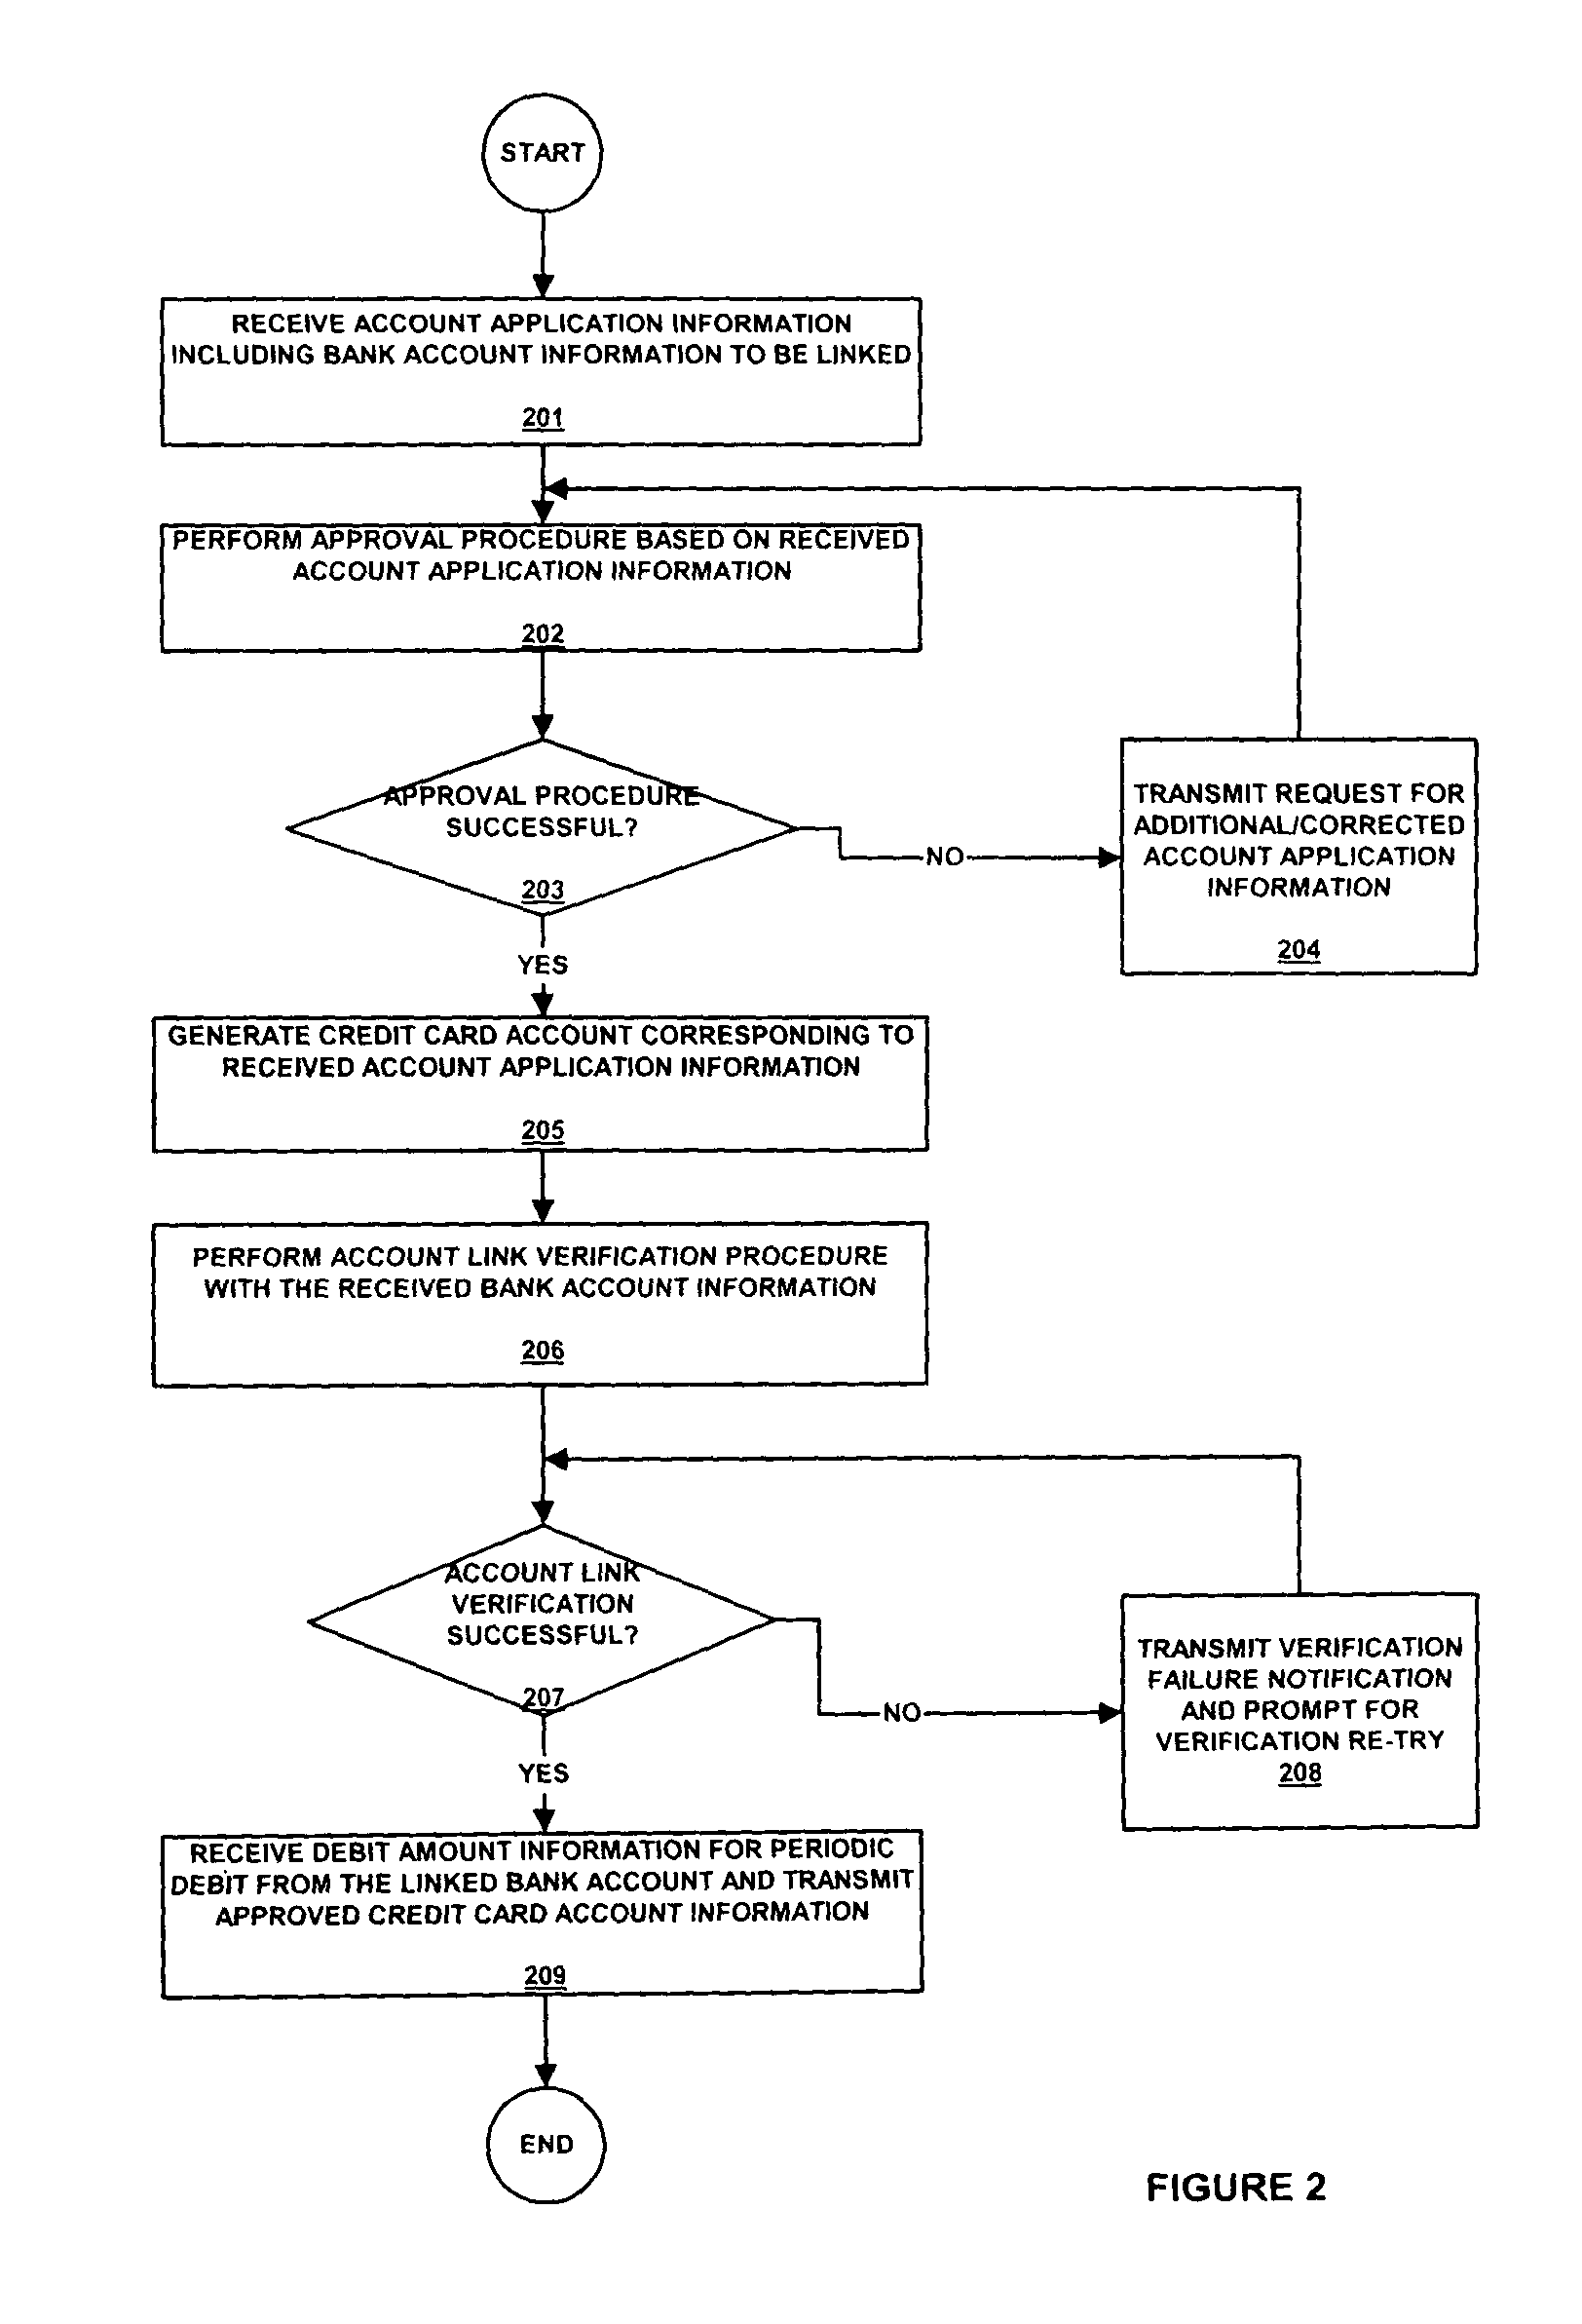 Method and system for underwriting and servicing financial accounts